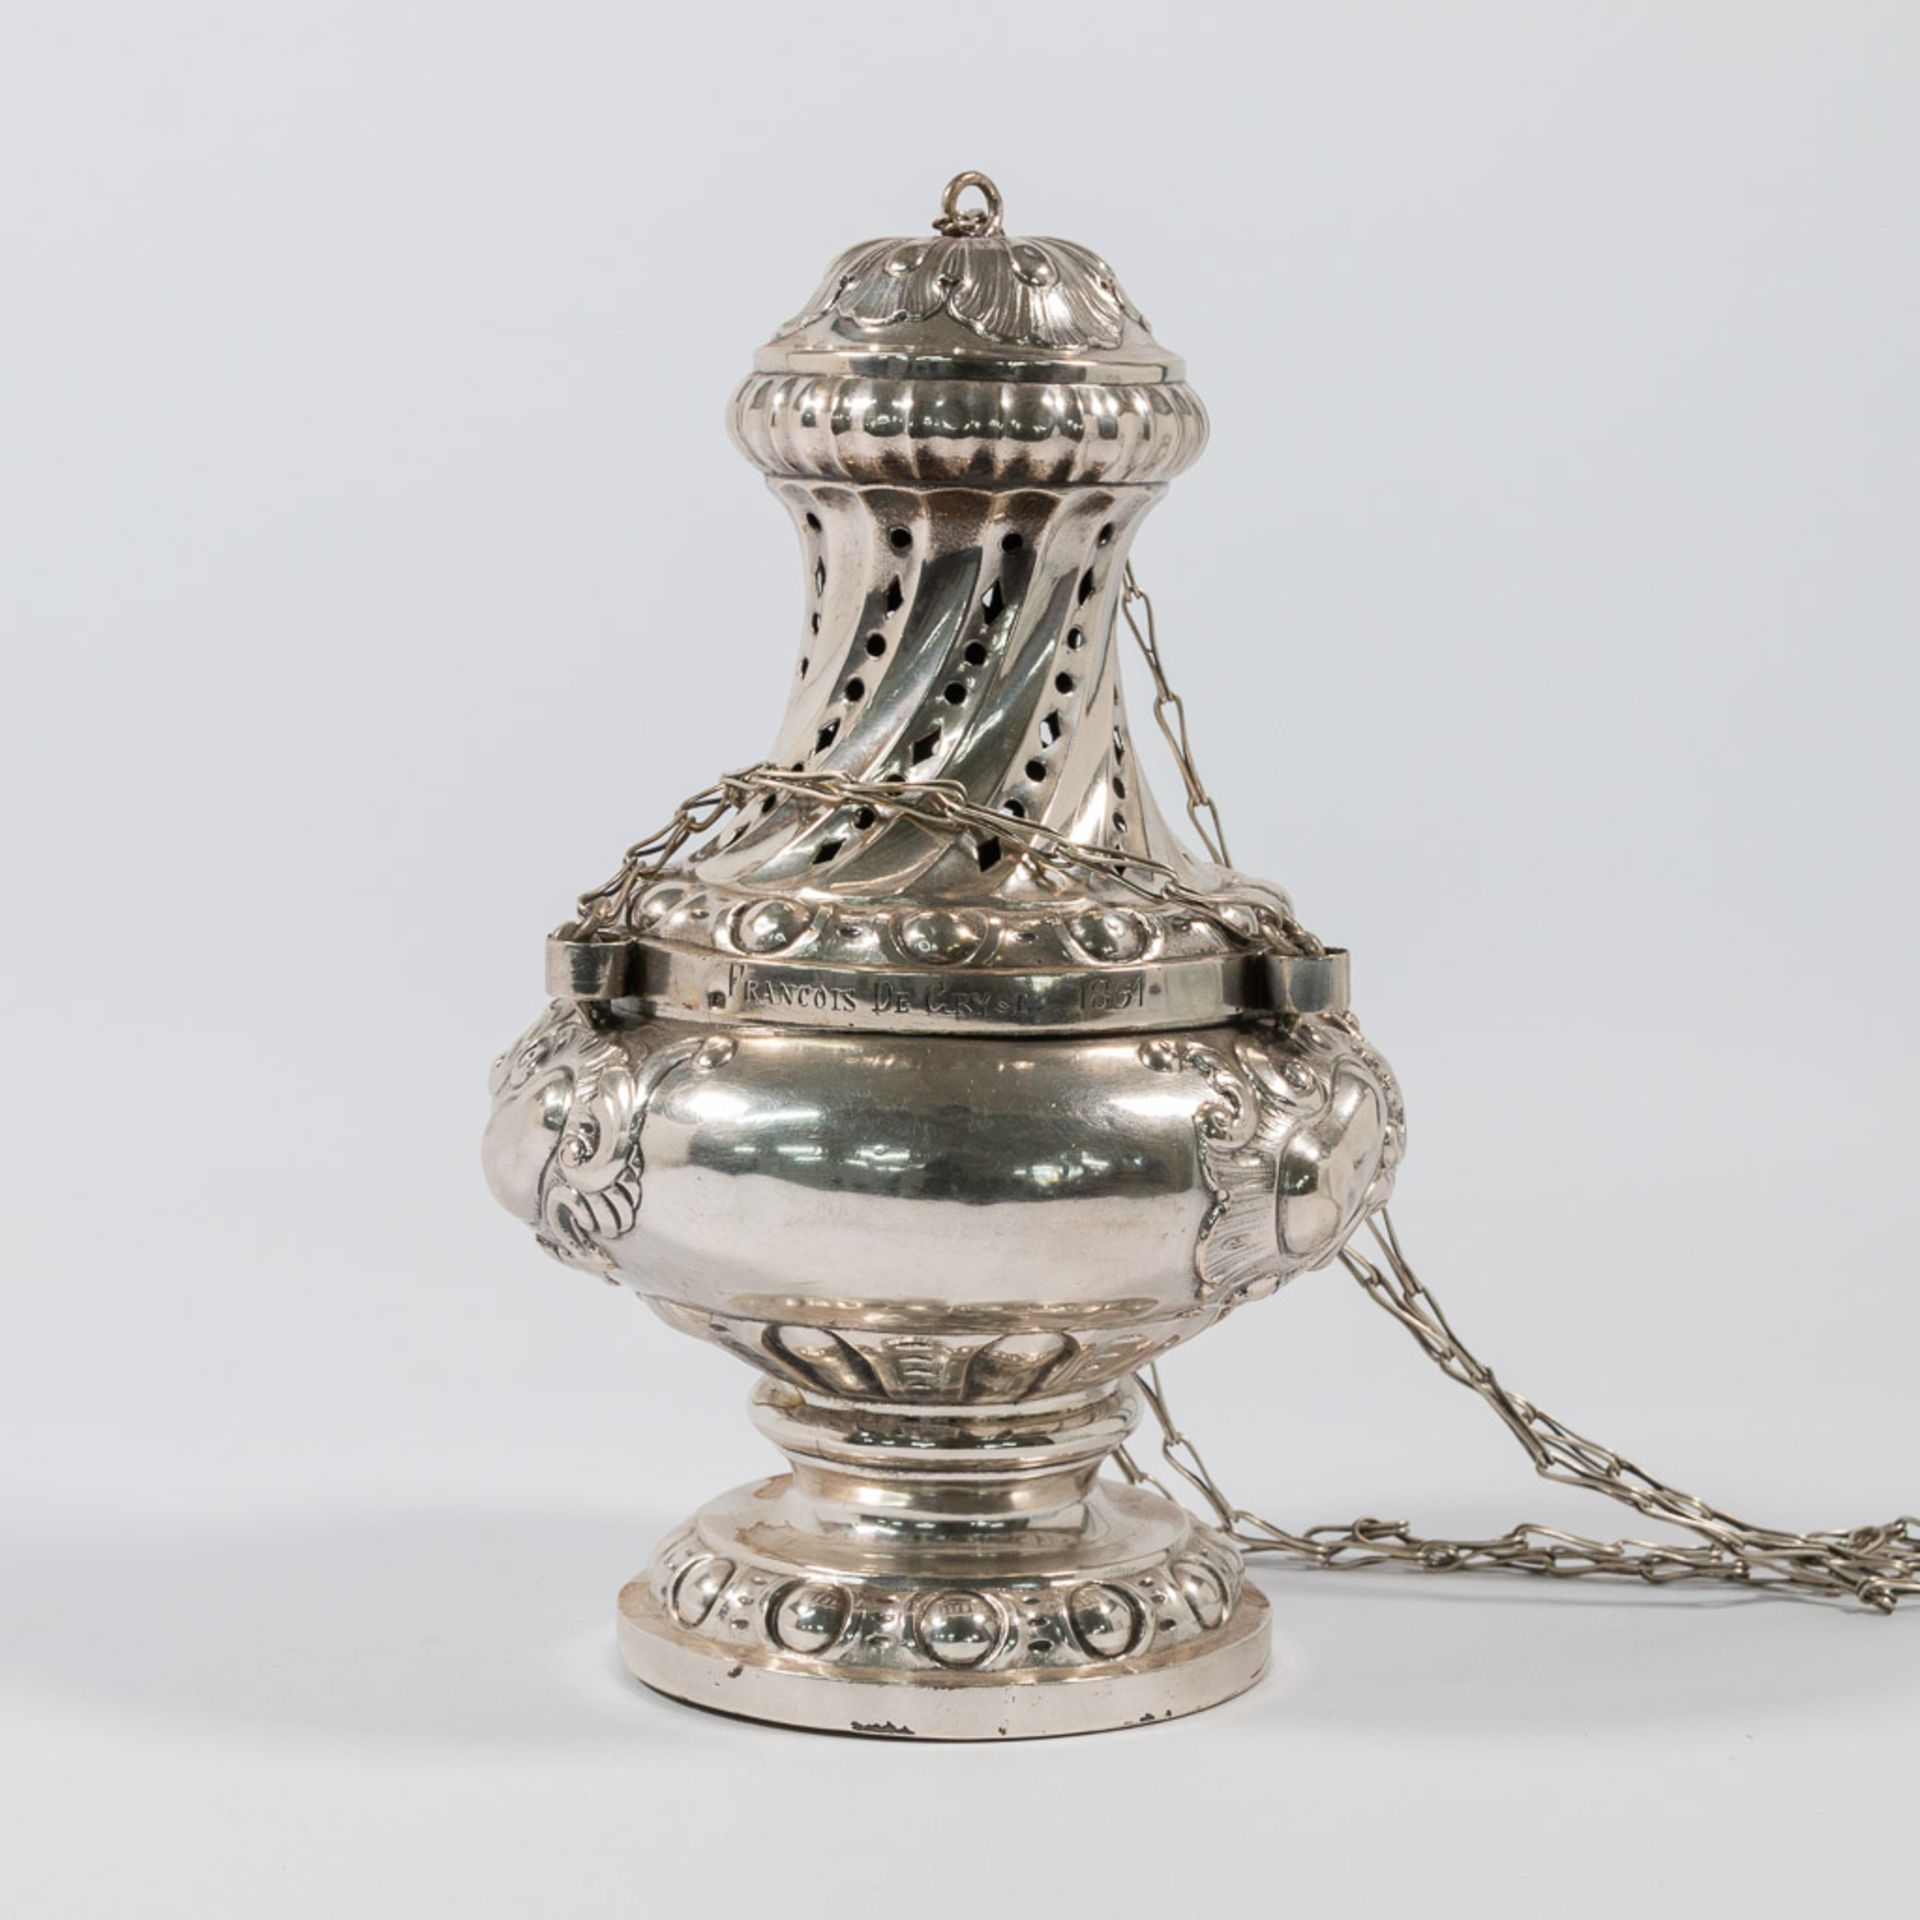 A silver Insence burner and Insence jar. - Image 19 of 39